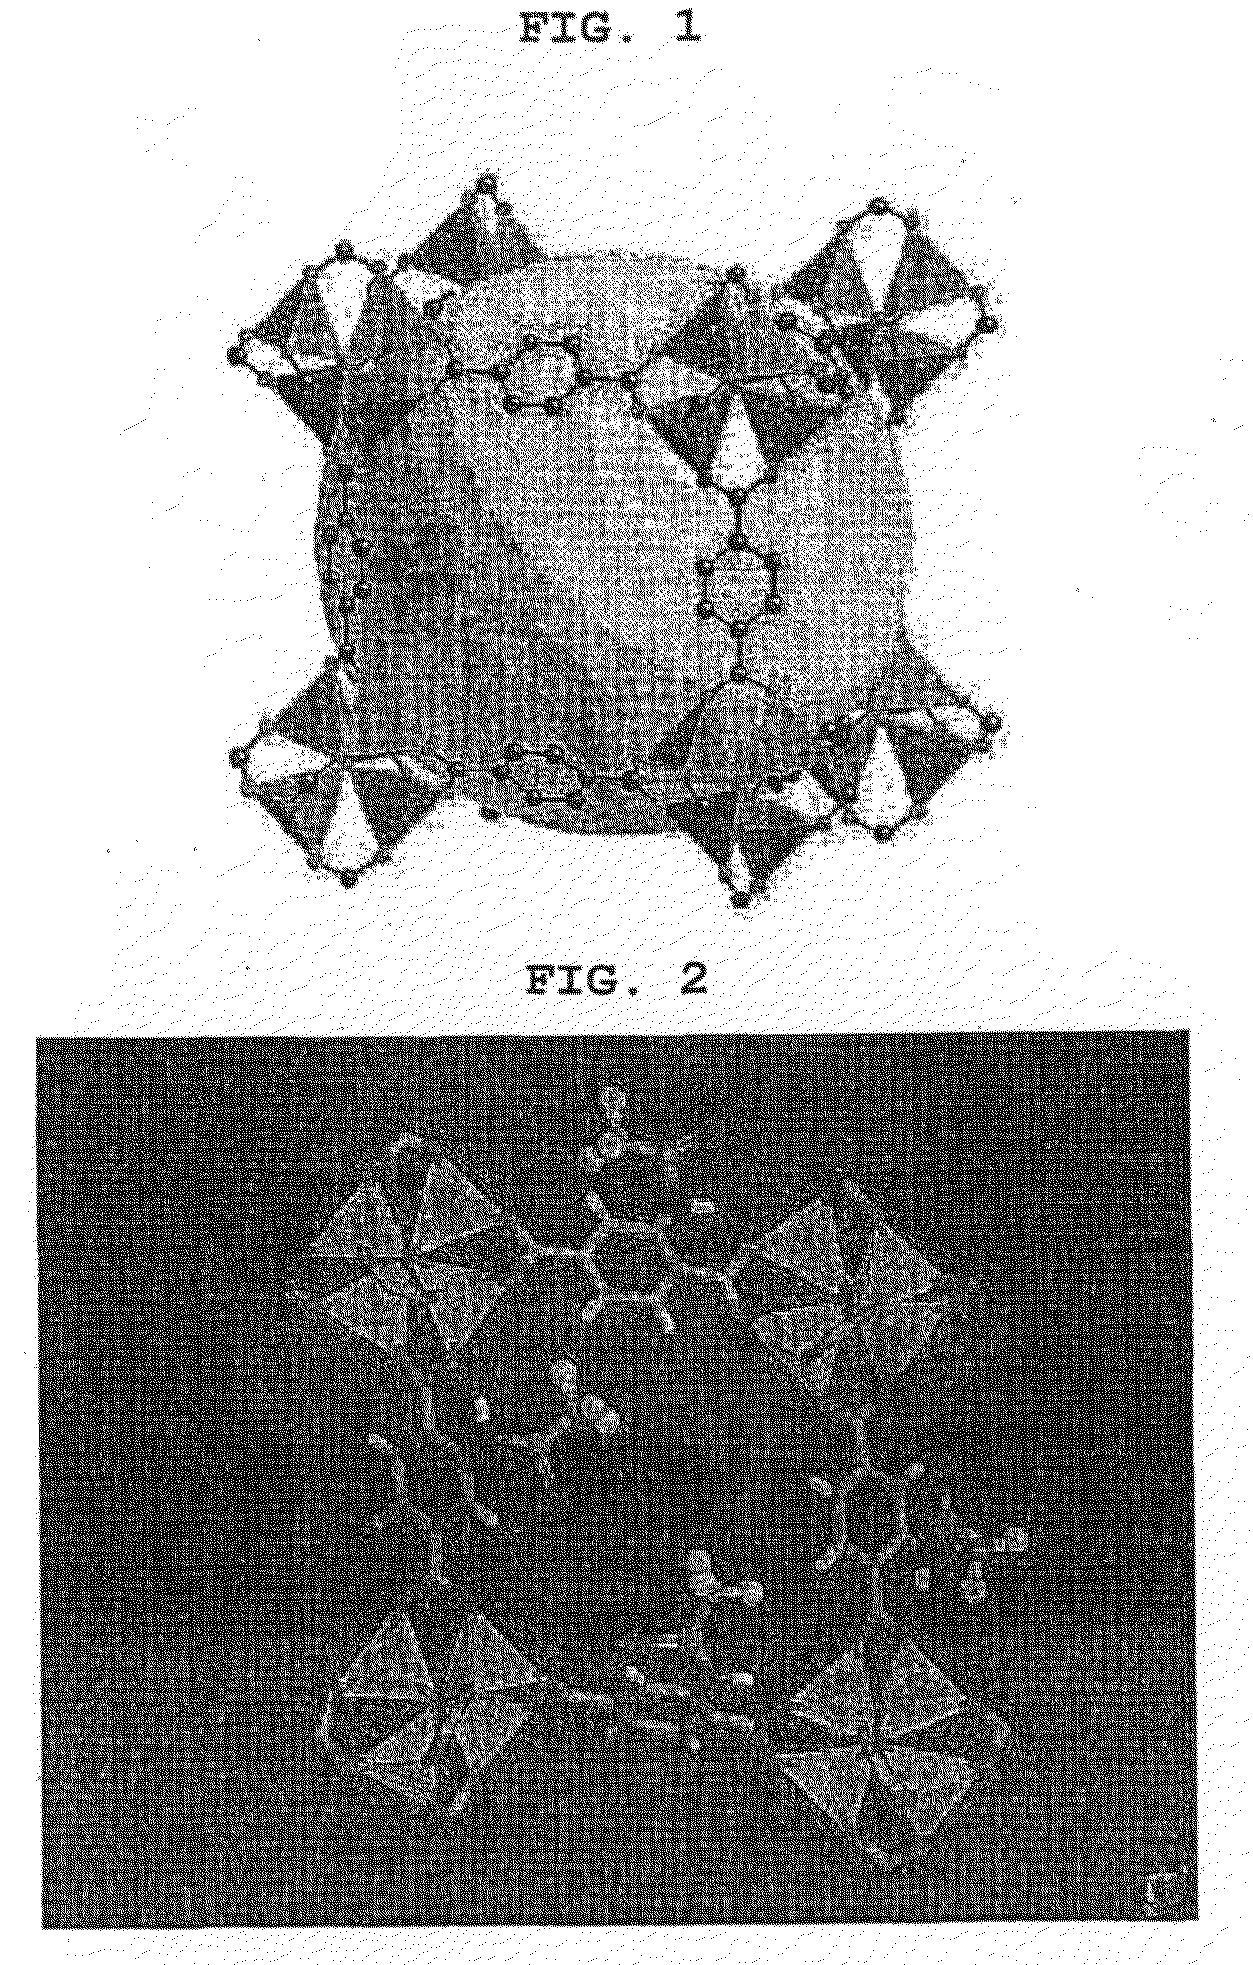 Coordination Polymer Crystal With Porous Metal-Organic Frameworks and Preparation Method Thereof